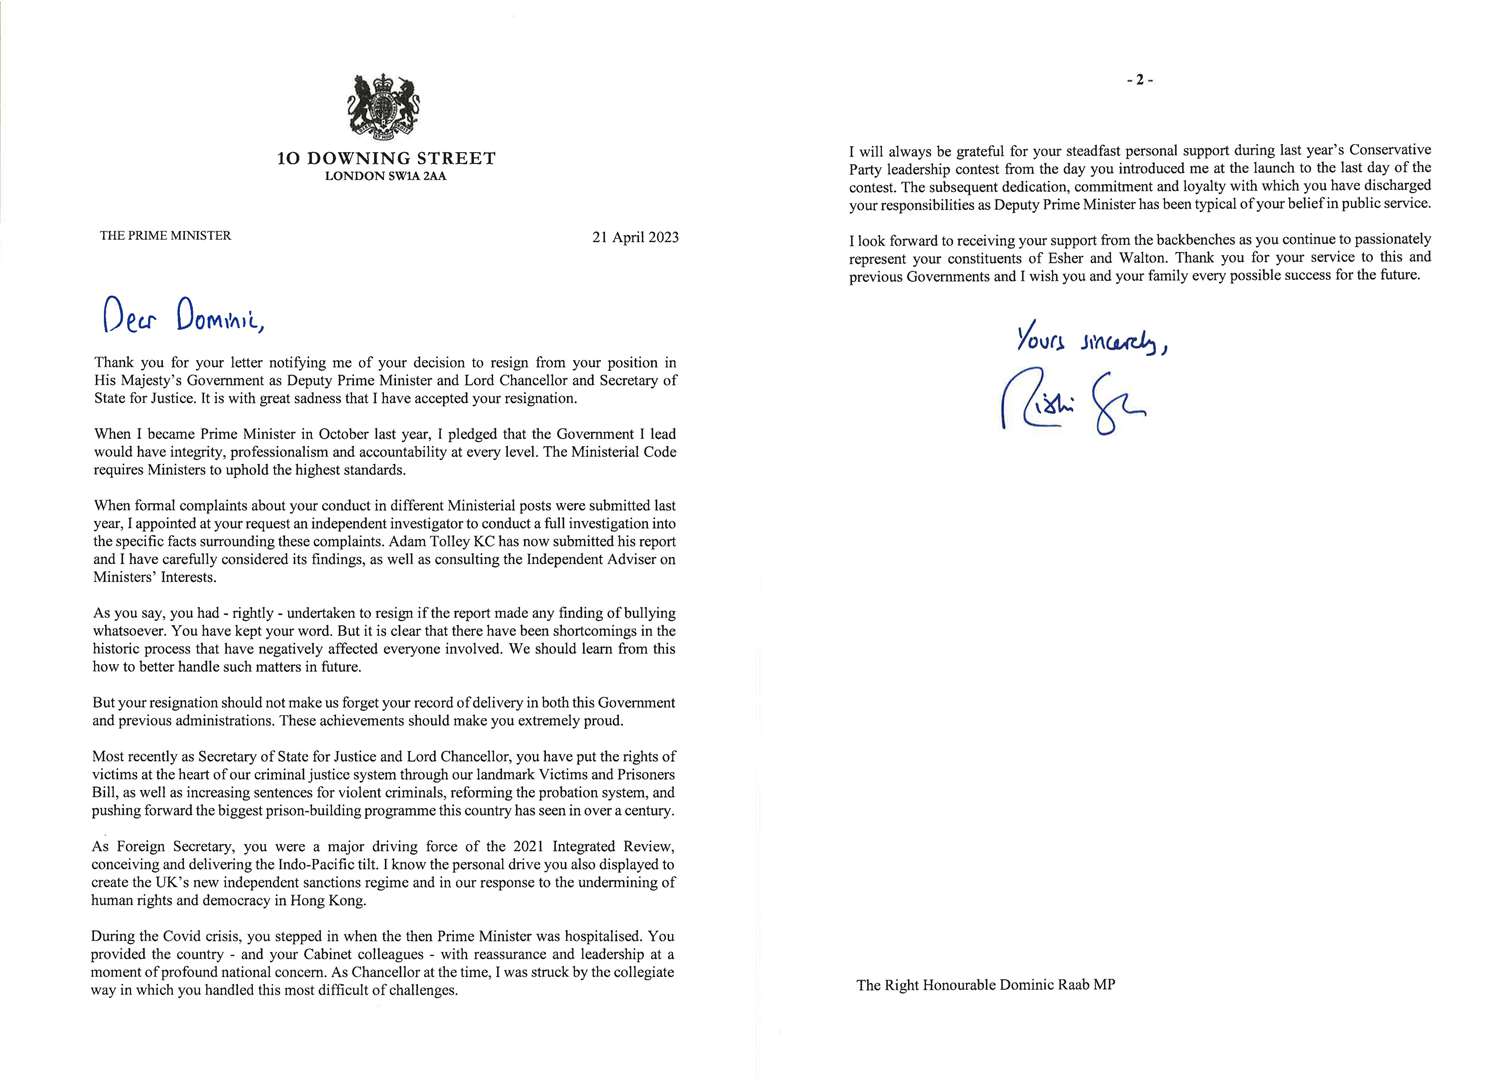 The letter by Rishi Sunak to Dominic Raab following his resignation (Downing Street/PA)